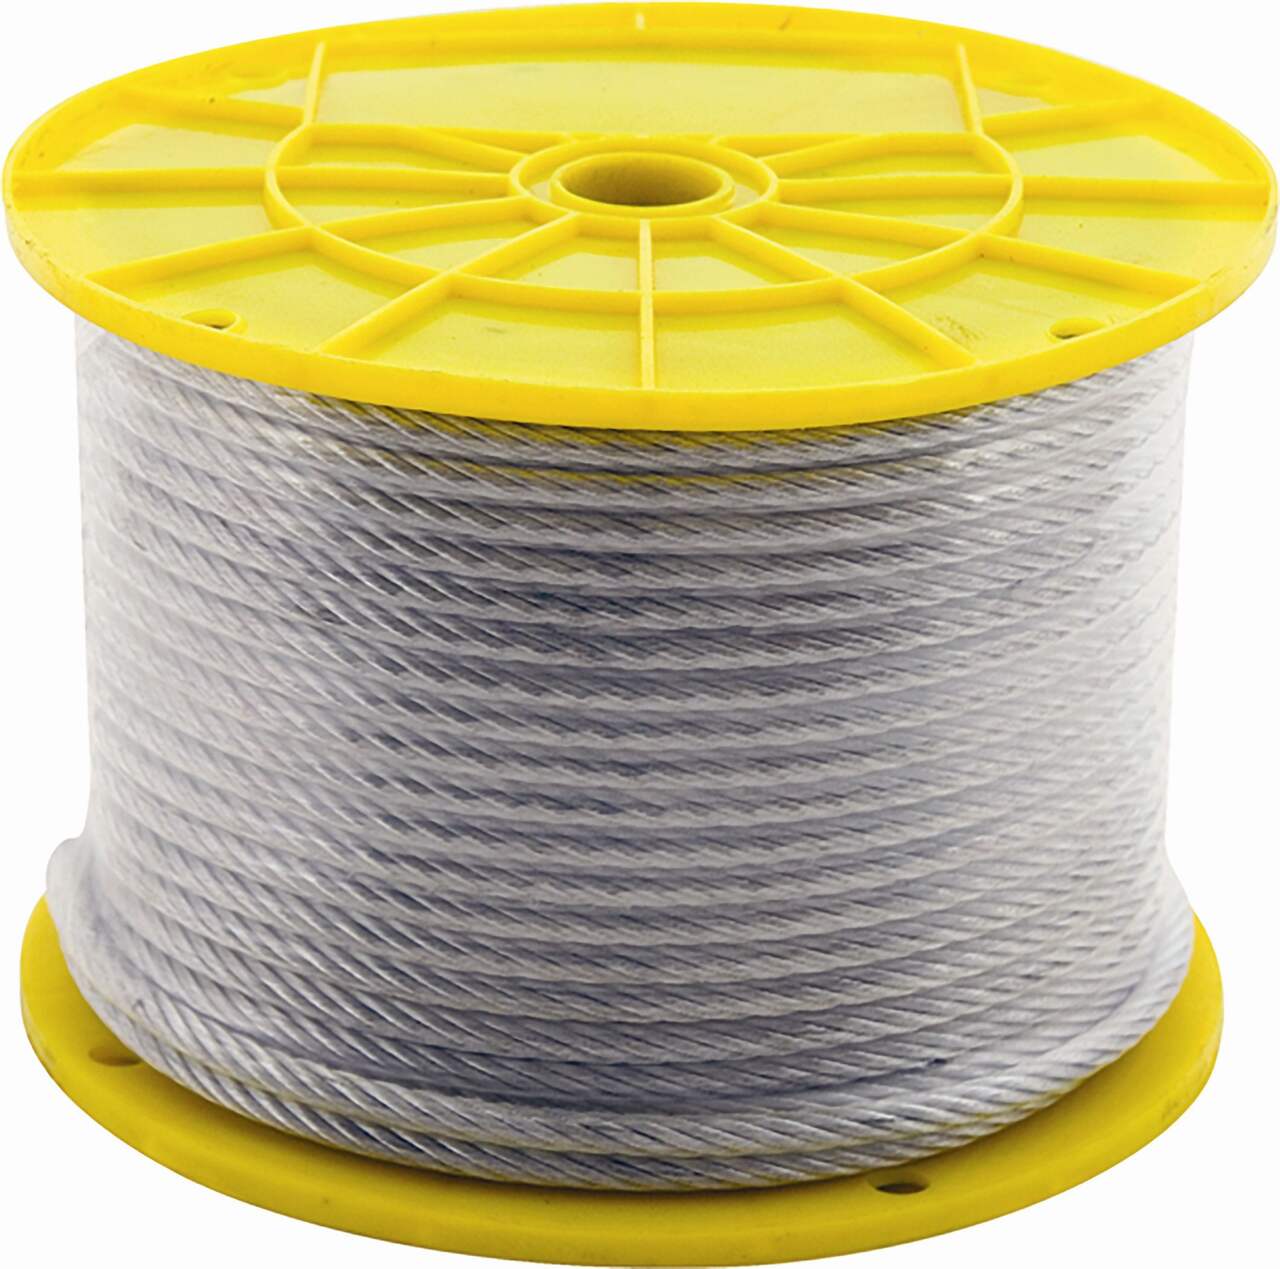 Reel 7x19 Galvanized Steel Cable, 1/8-in x 500-ft